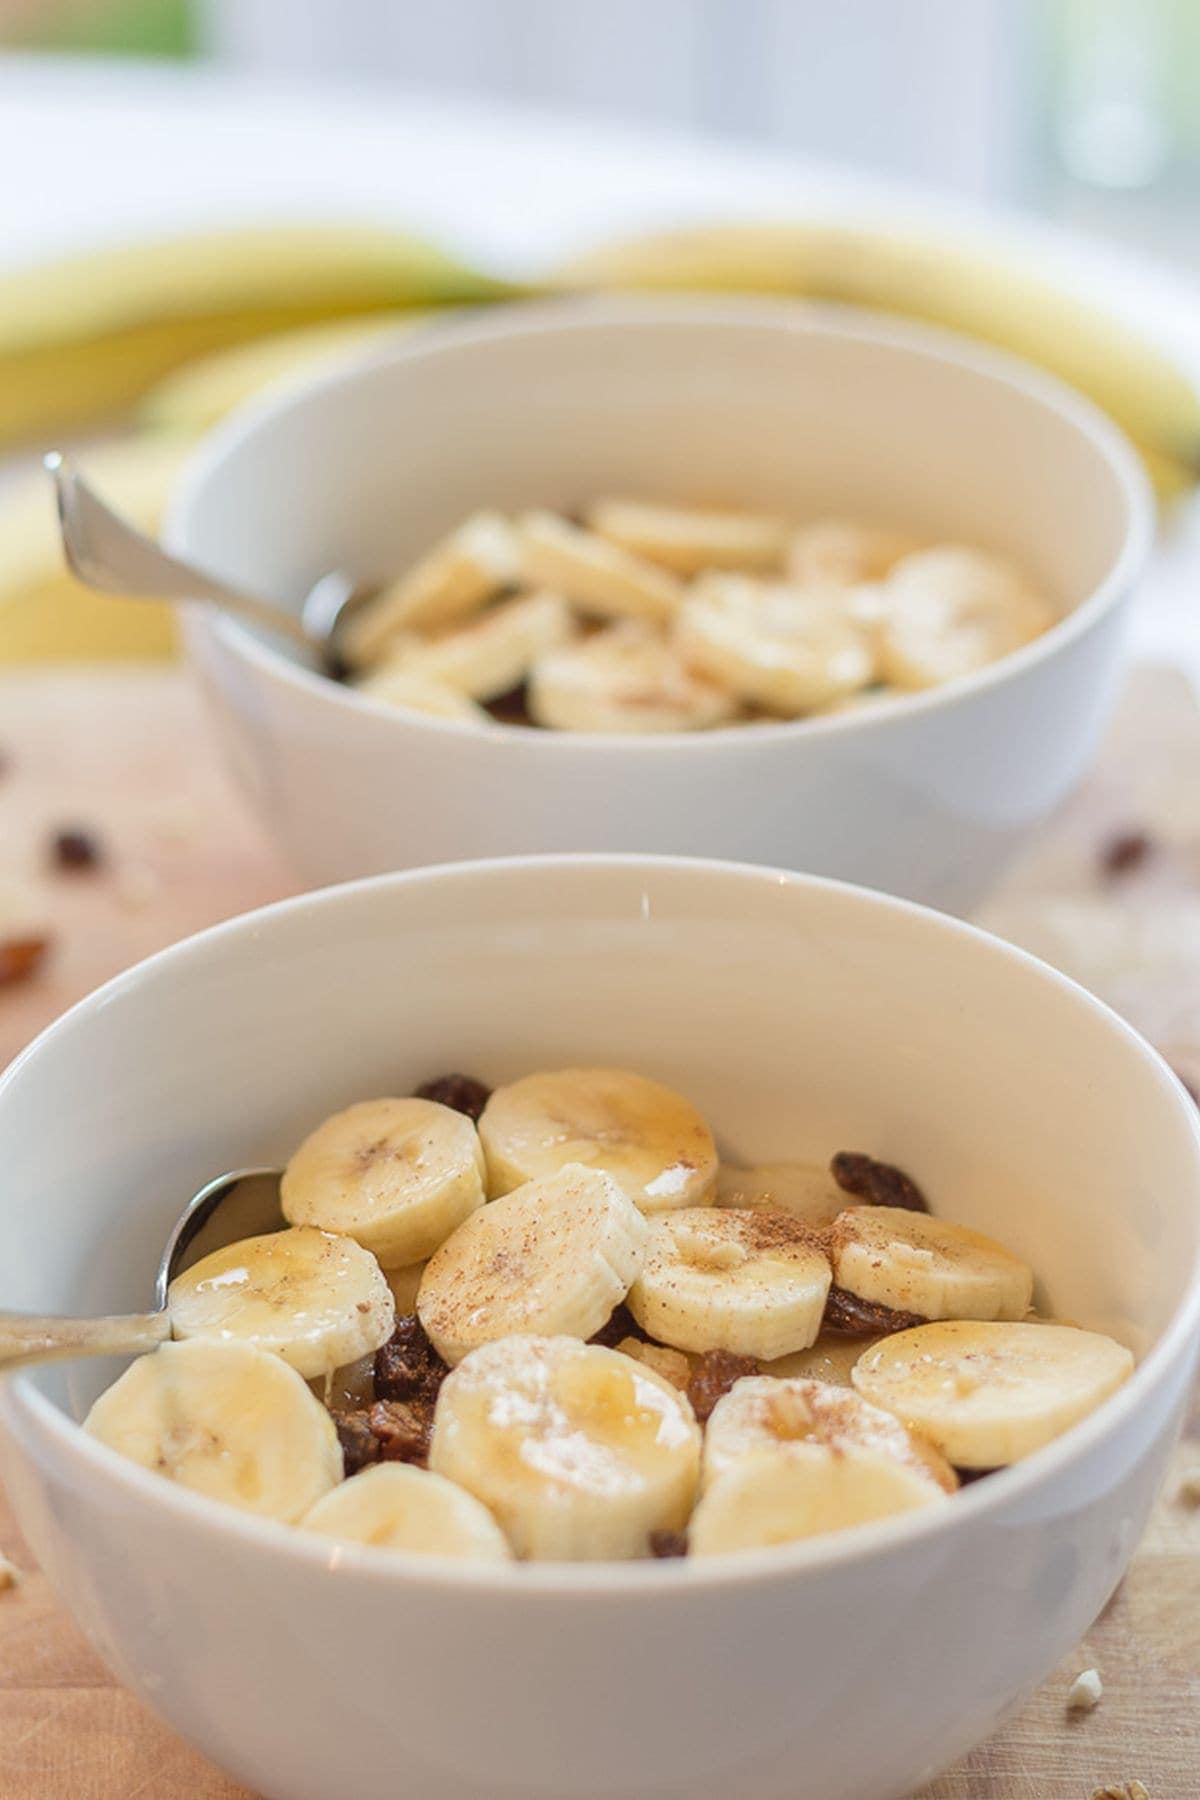 Two bowls of semolina breakfast porridge one in front of the other decorated with sliced bananas.